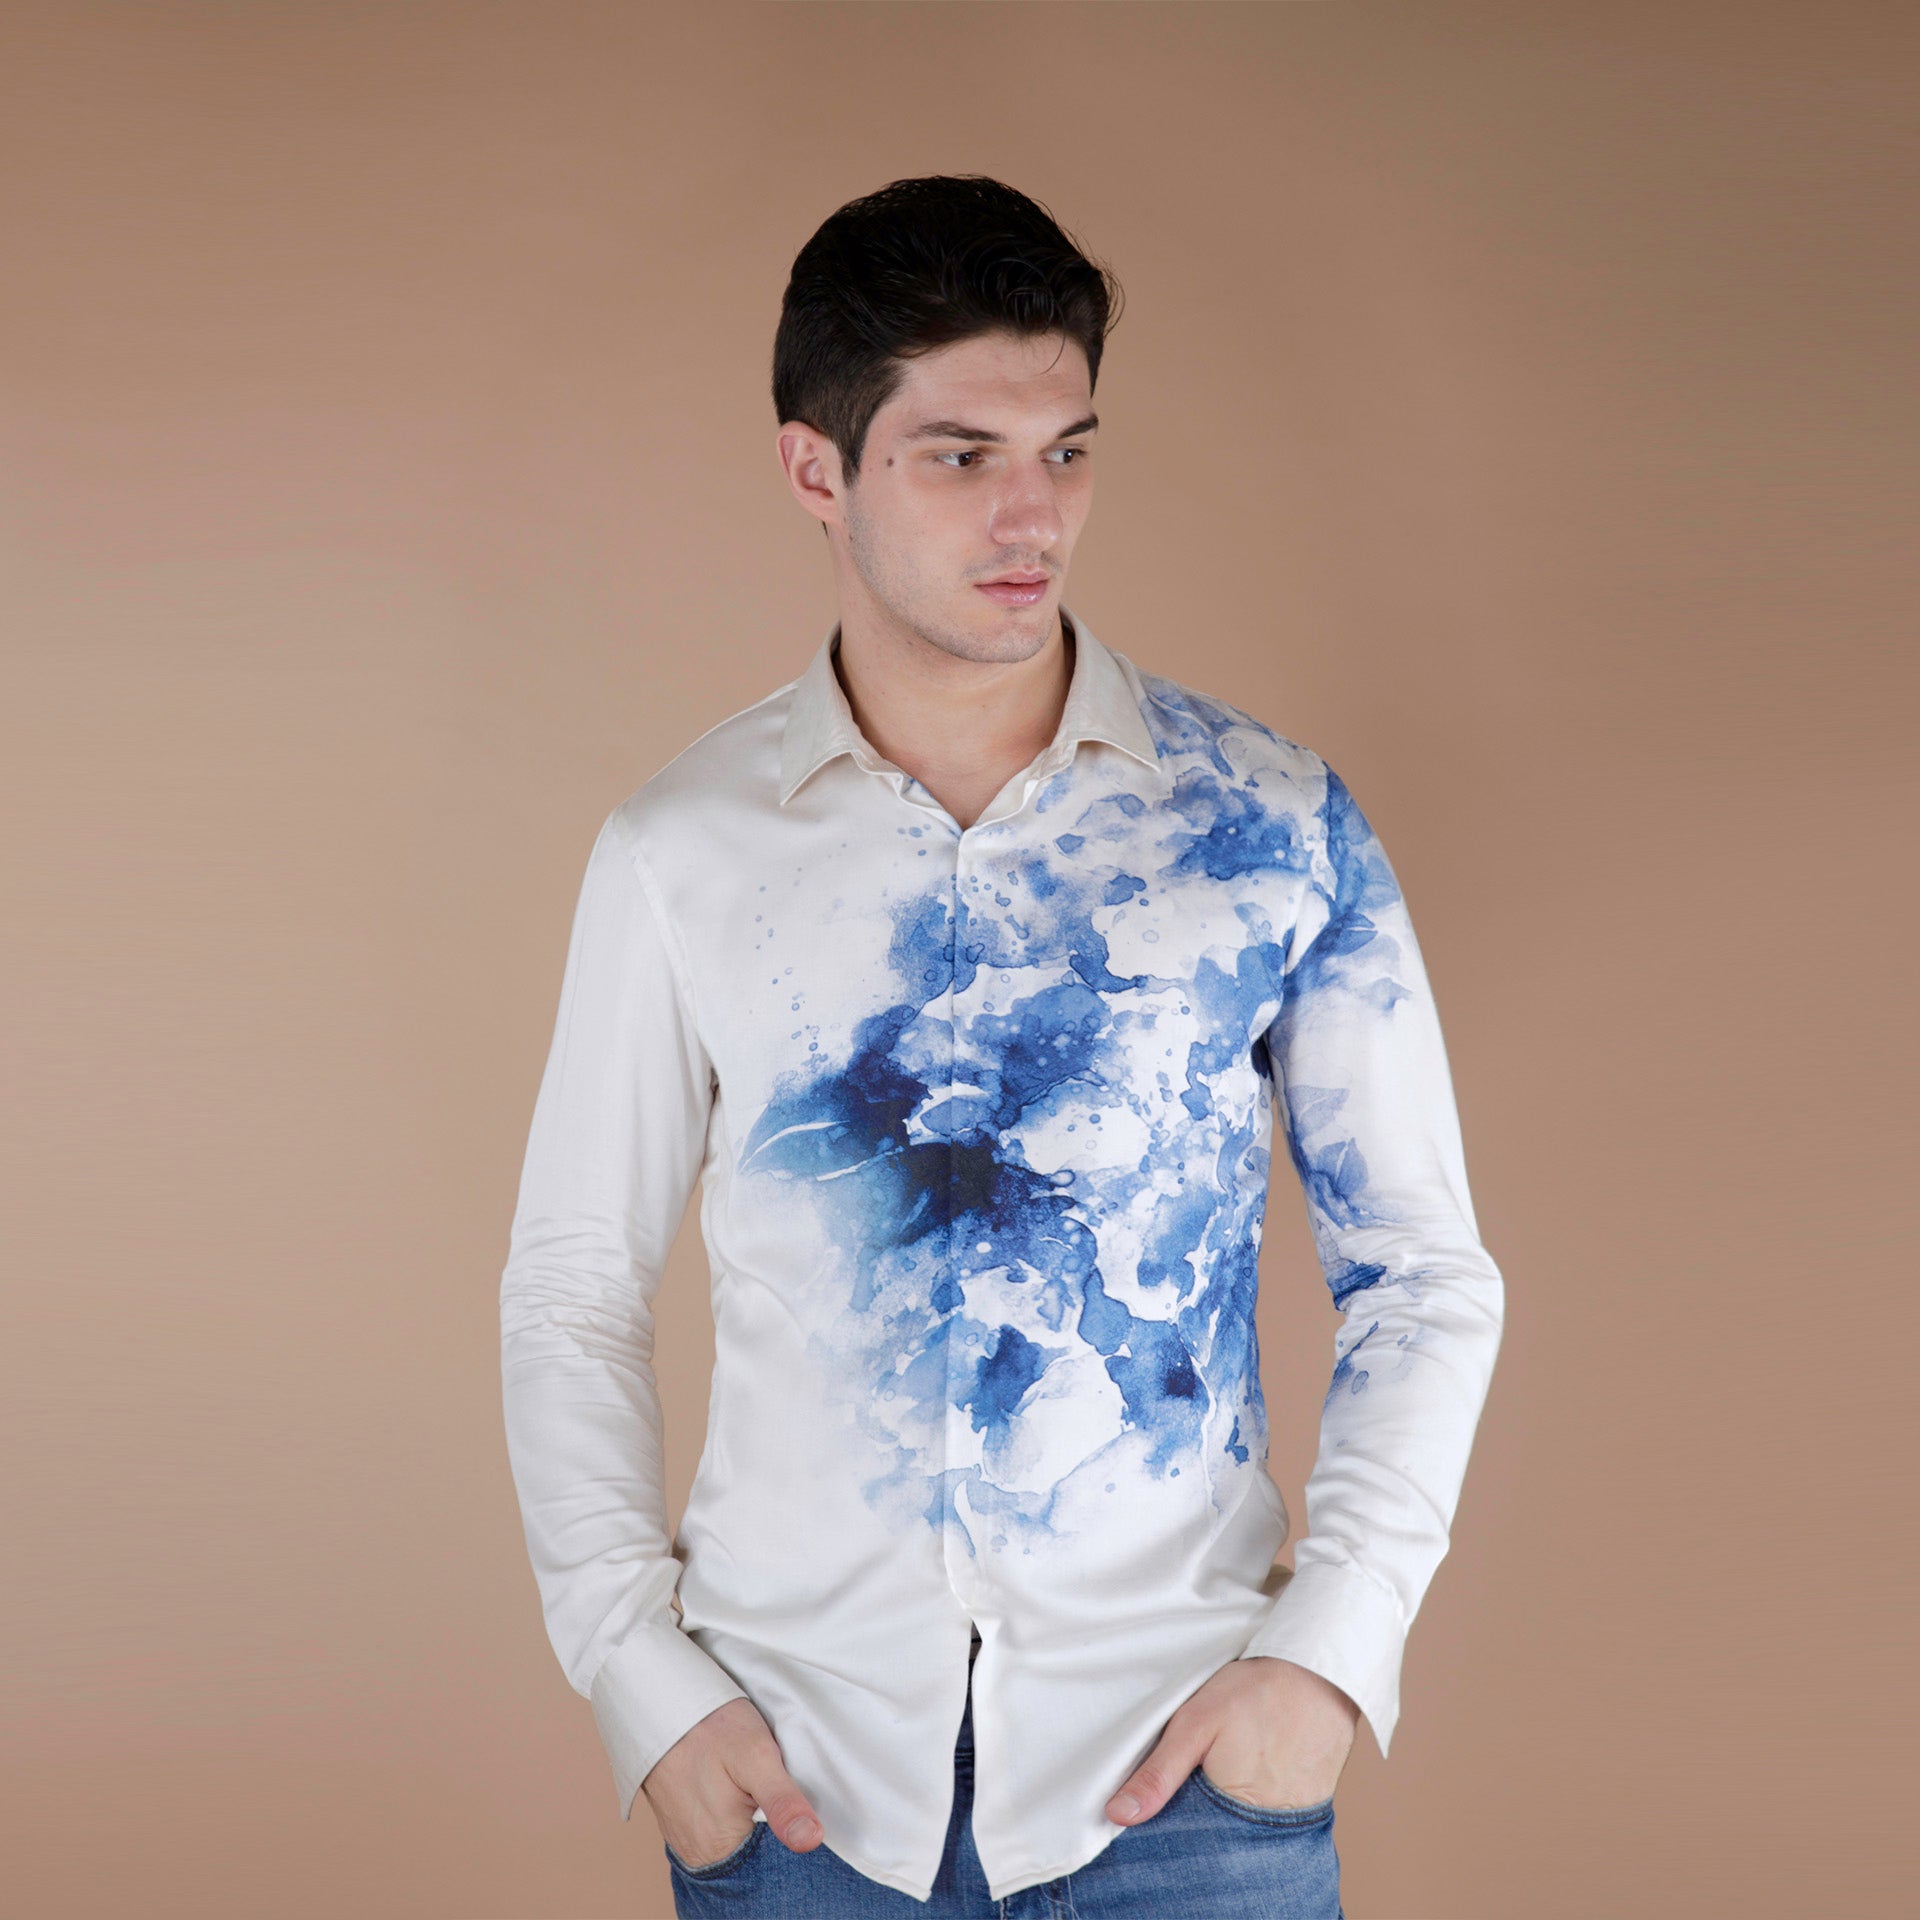 Global medium size model wearing an exquisite Cream and Blue printed organic lotus fabric shirt, meticulously crafted from luxurious Lotus stem silk fabric. Adorned with a striking blue floral in front and back with a placement print cascading from the left side to the right, against a pristine cream base